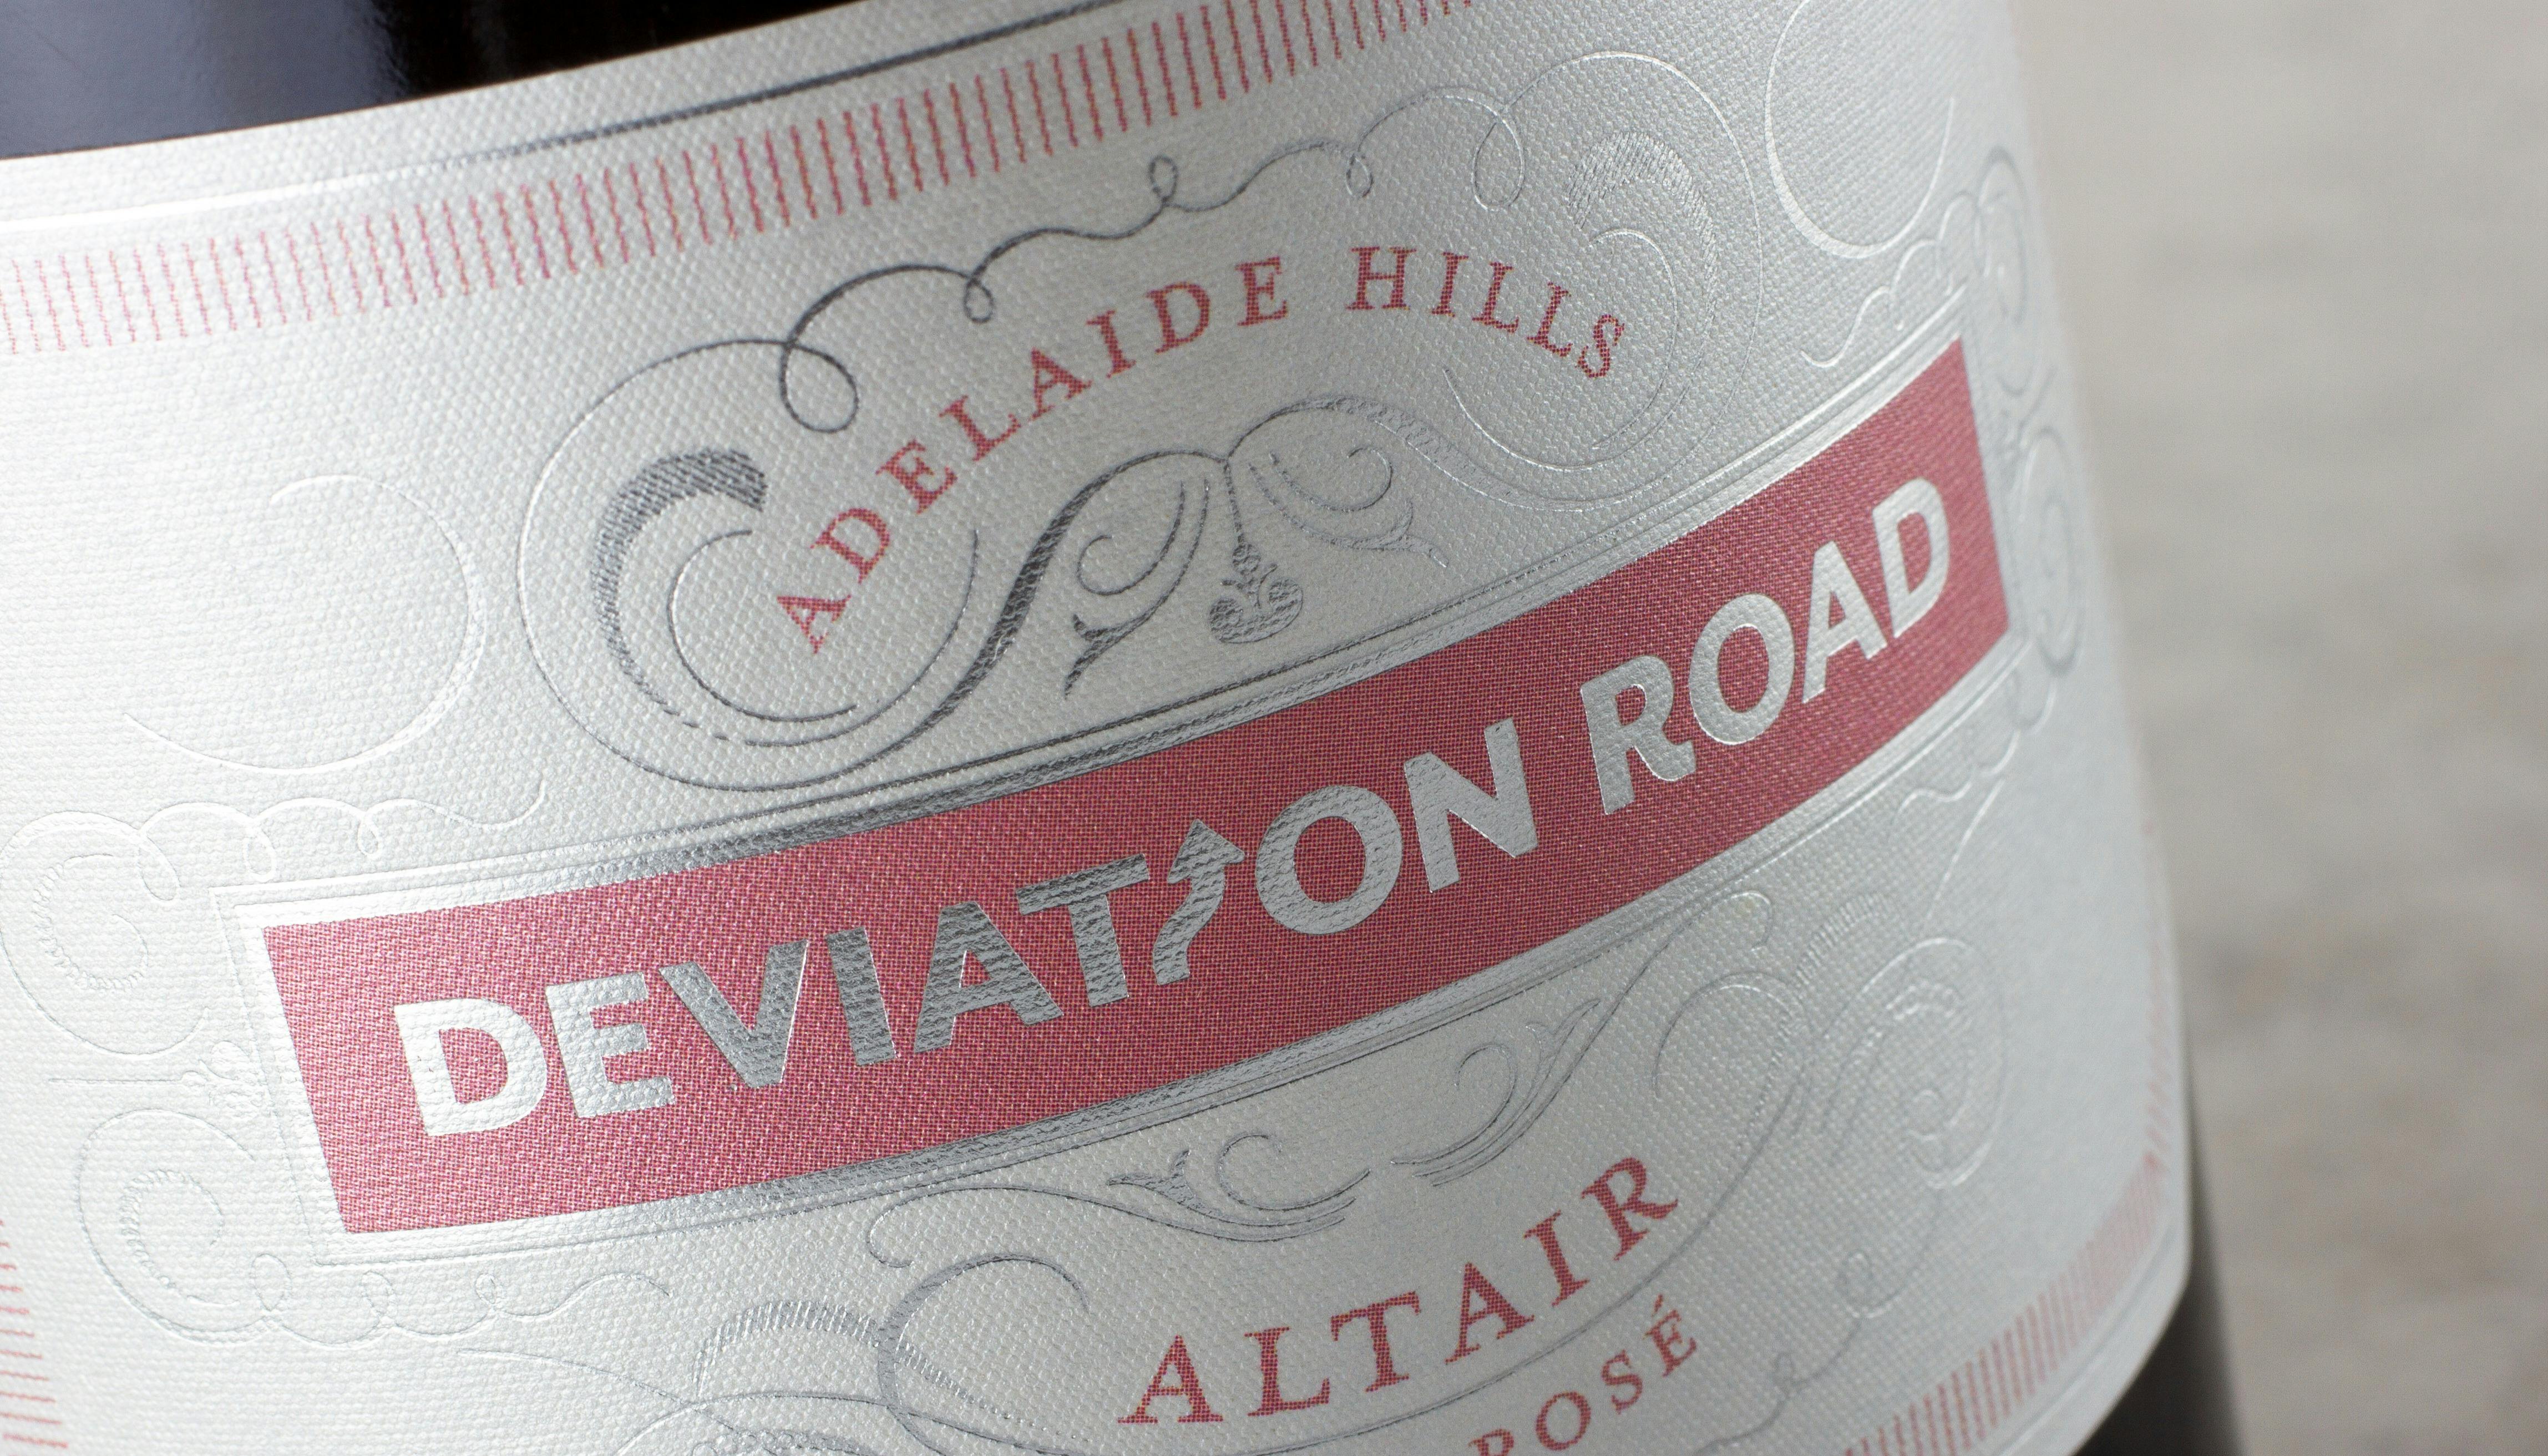 Deviation Road Winery